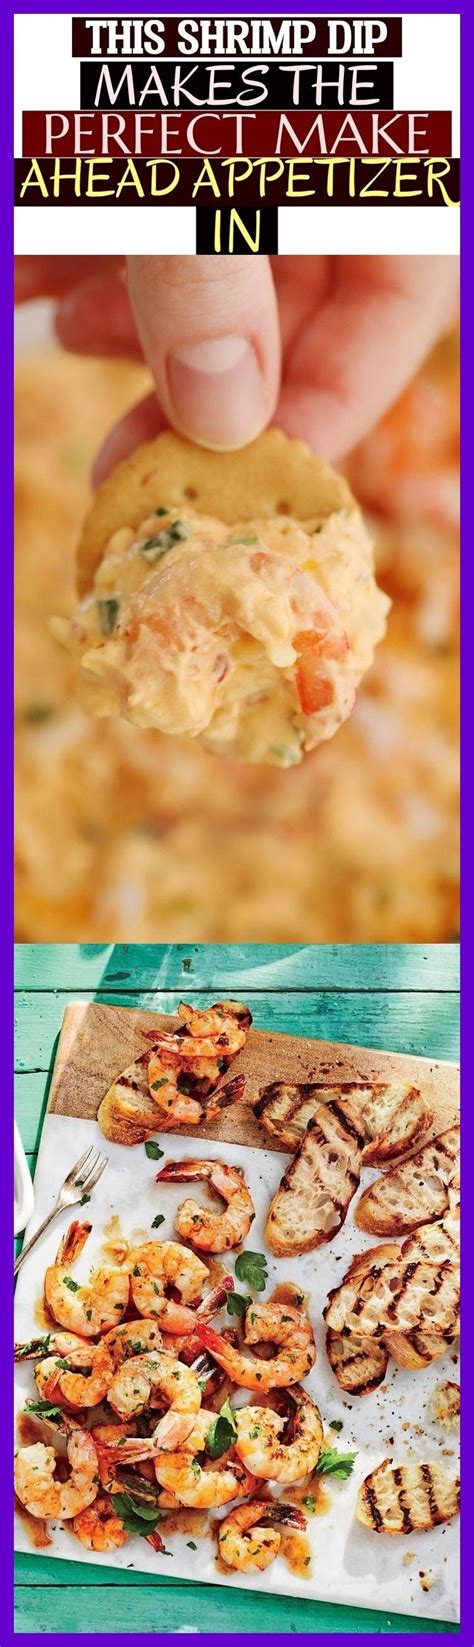 One can also watch recipe shows one can find a good list for appetizers on websites like recipe, quickrecipes, and more. This Shrimp Dip Makes The Perfect Make Ahead Appetizer In ...